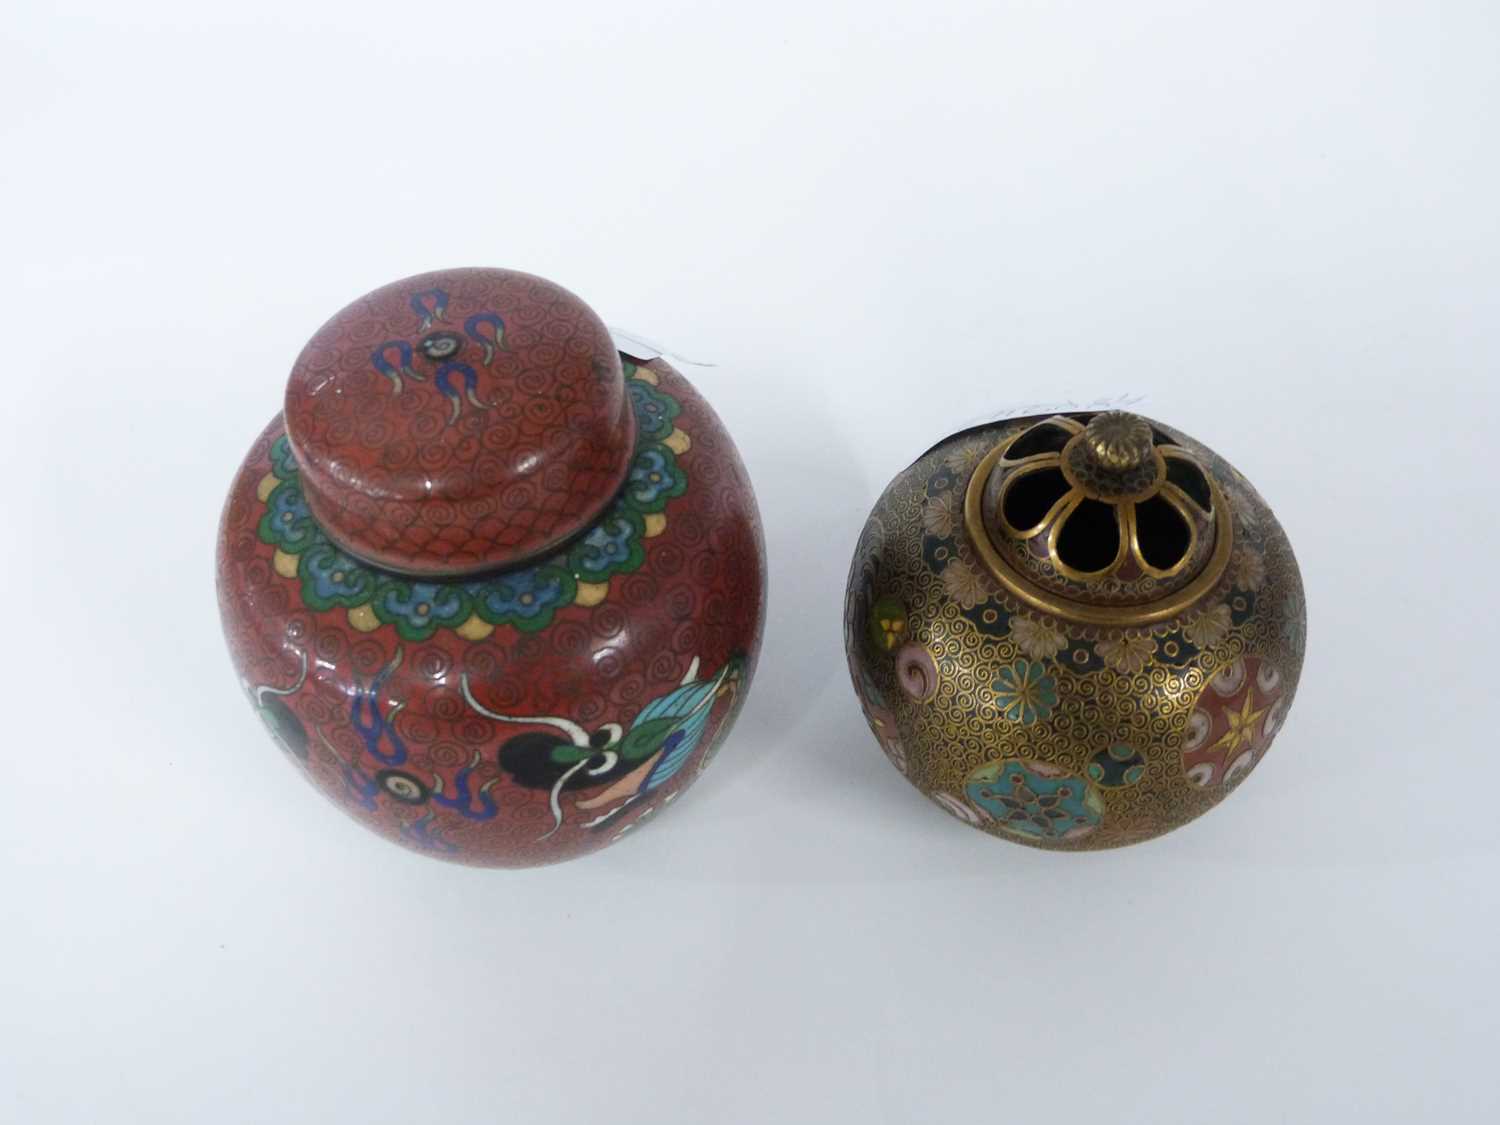 Cloisonne incense burner of globular form with pierced cover together with a small Cloisonne jar and - Image 4 of 36